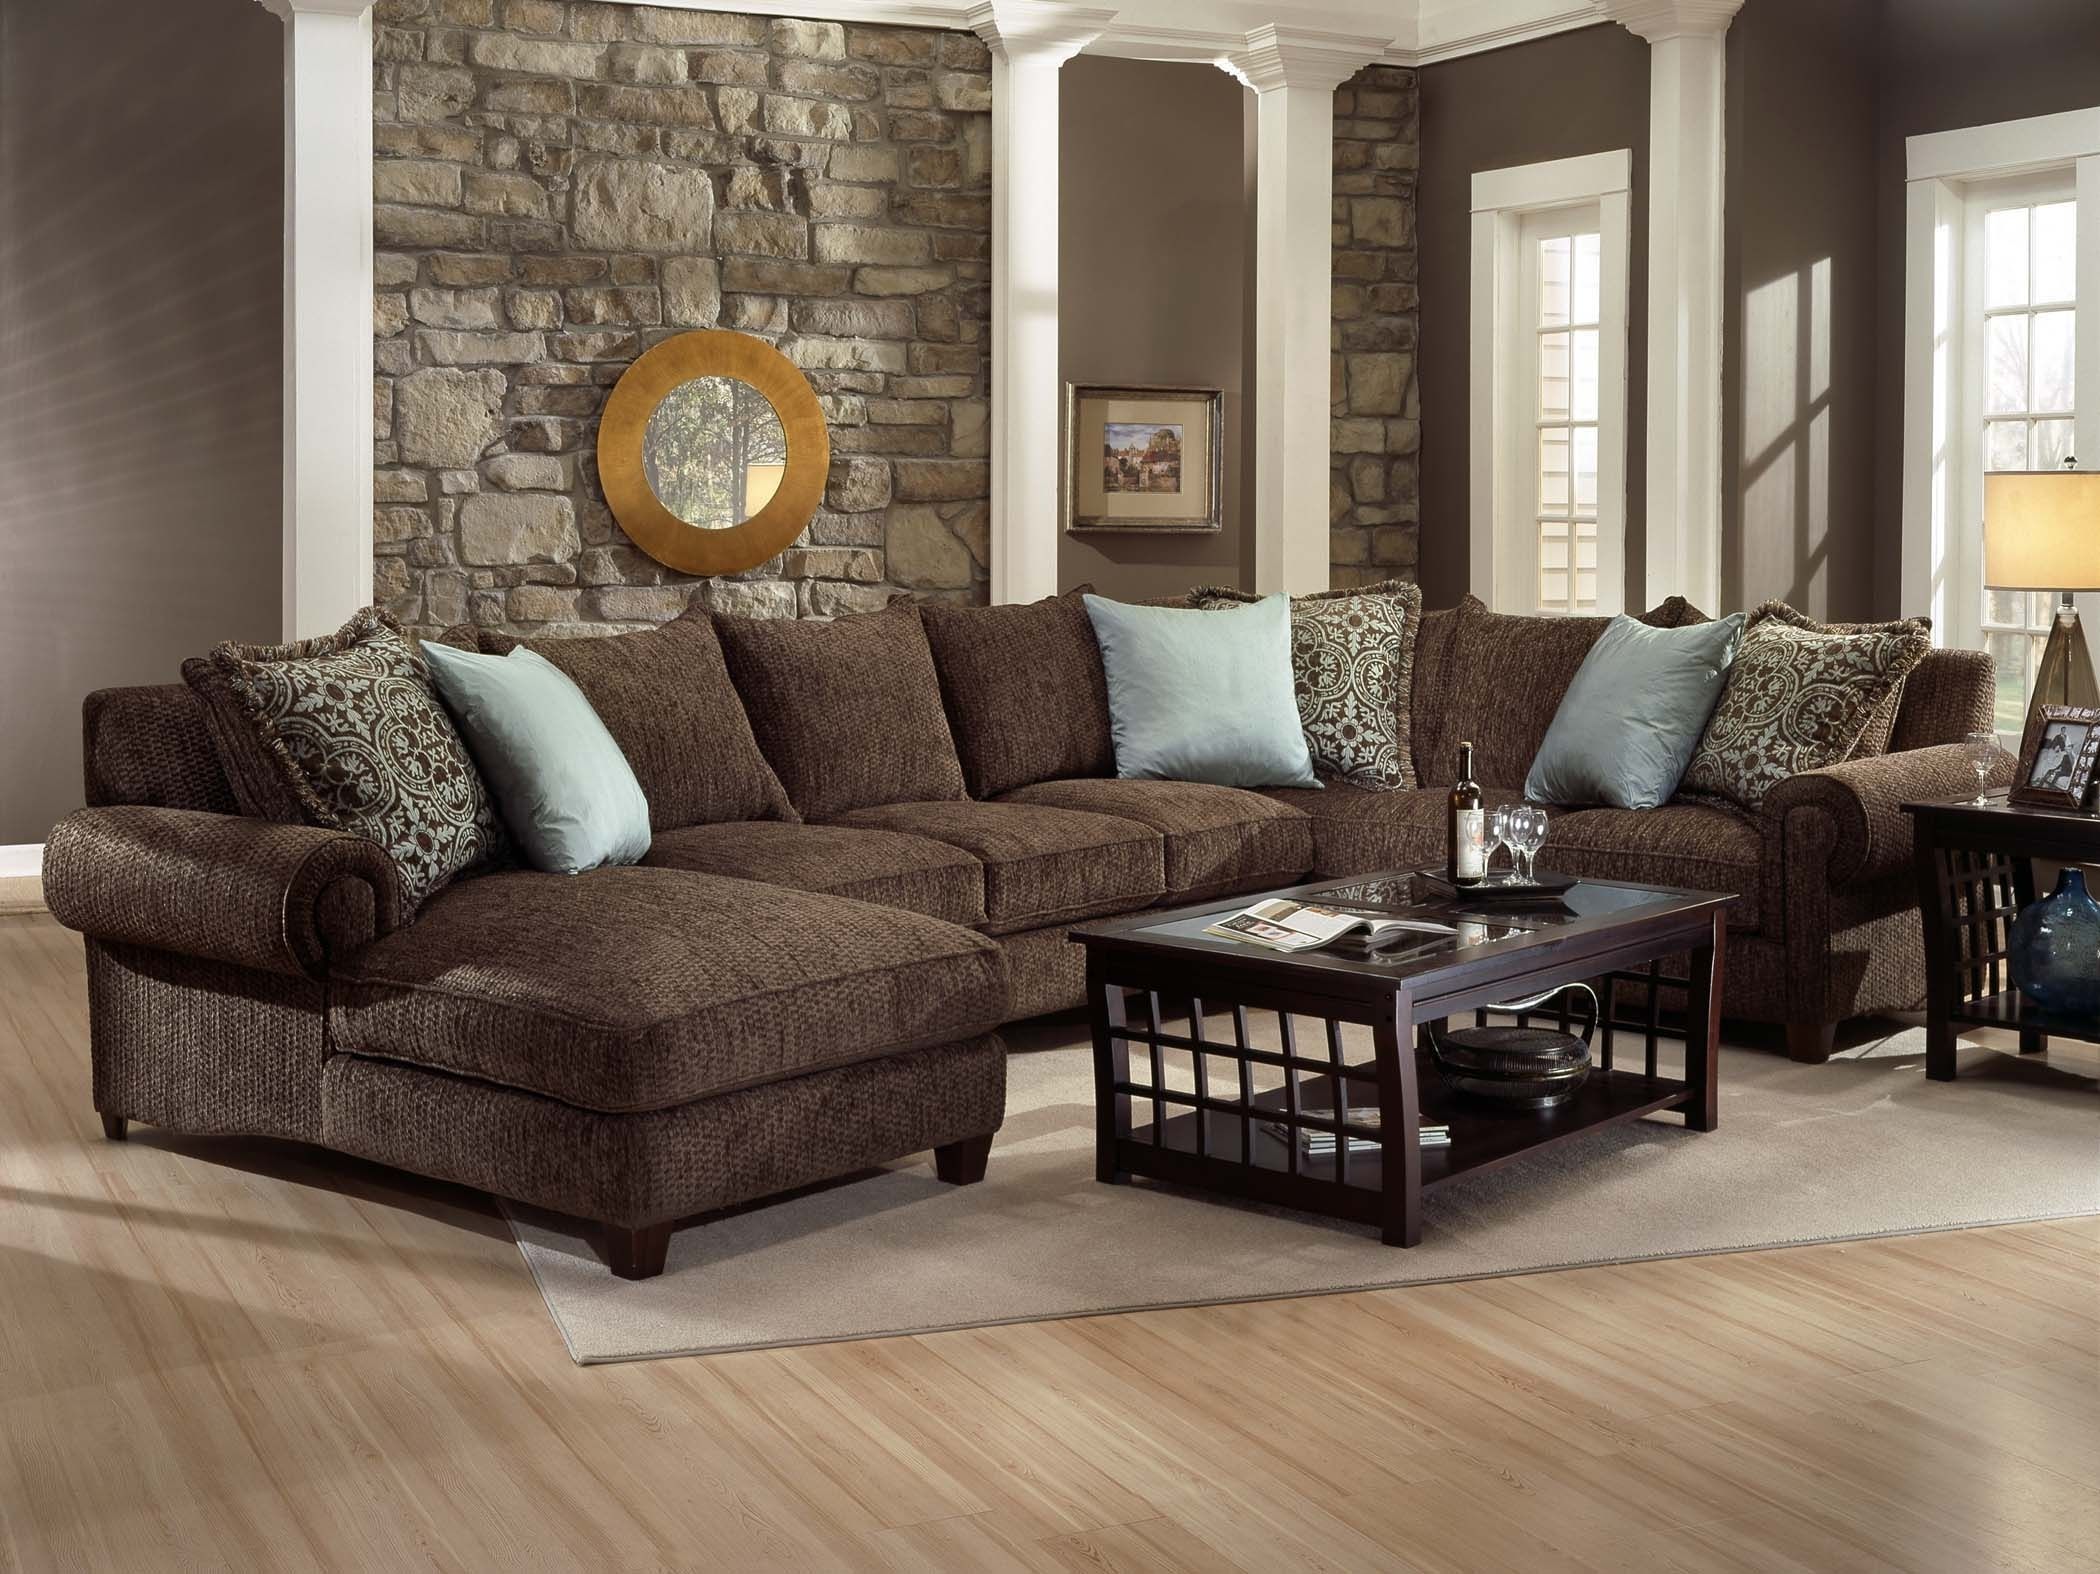 Sectional Sofa Design: Wonderful Sectional Sofas Denver Best Leather With Denver Sectional Sofas (View 6 of 10)